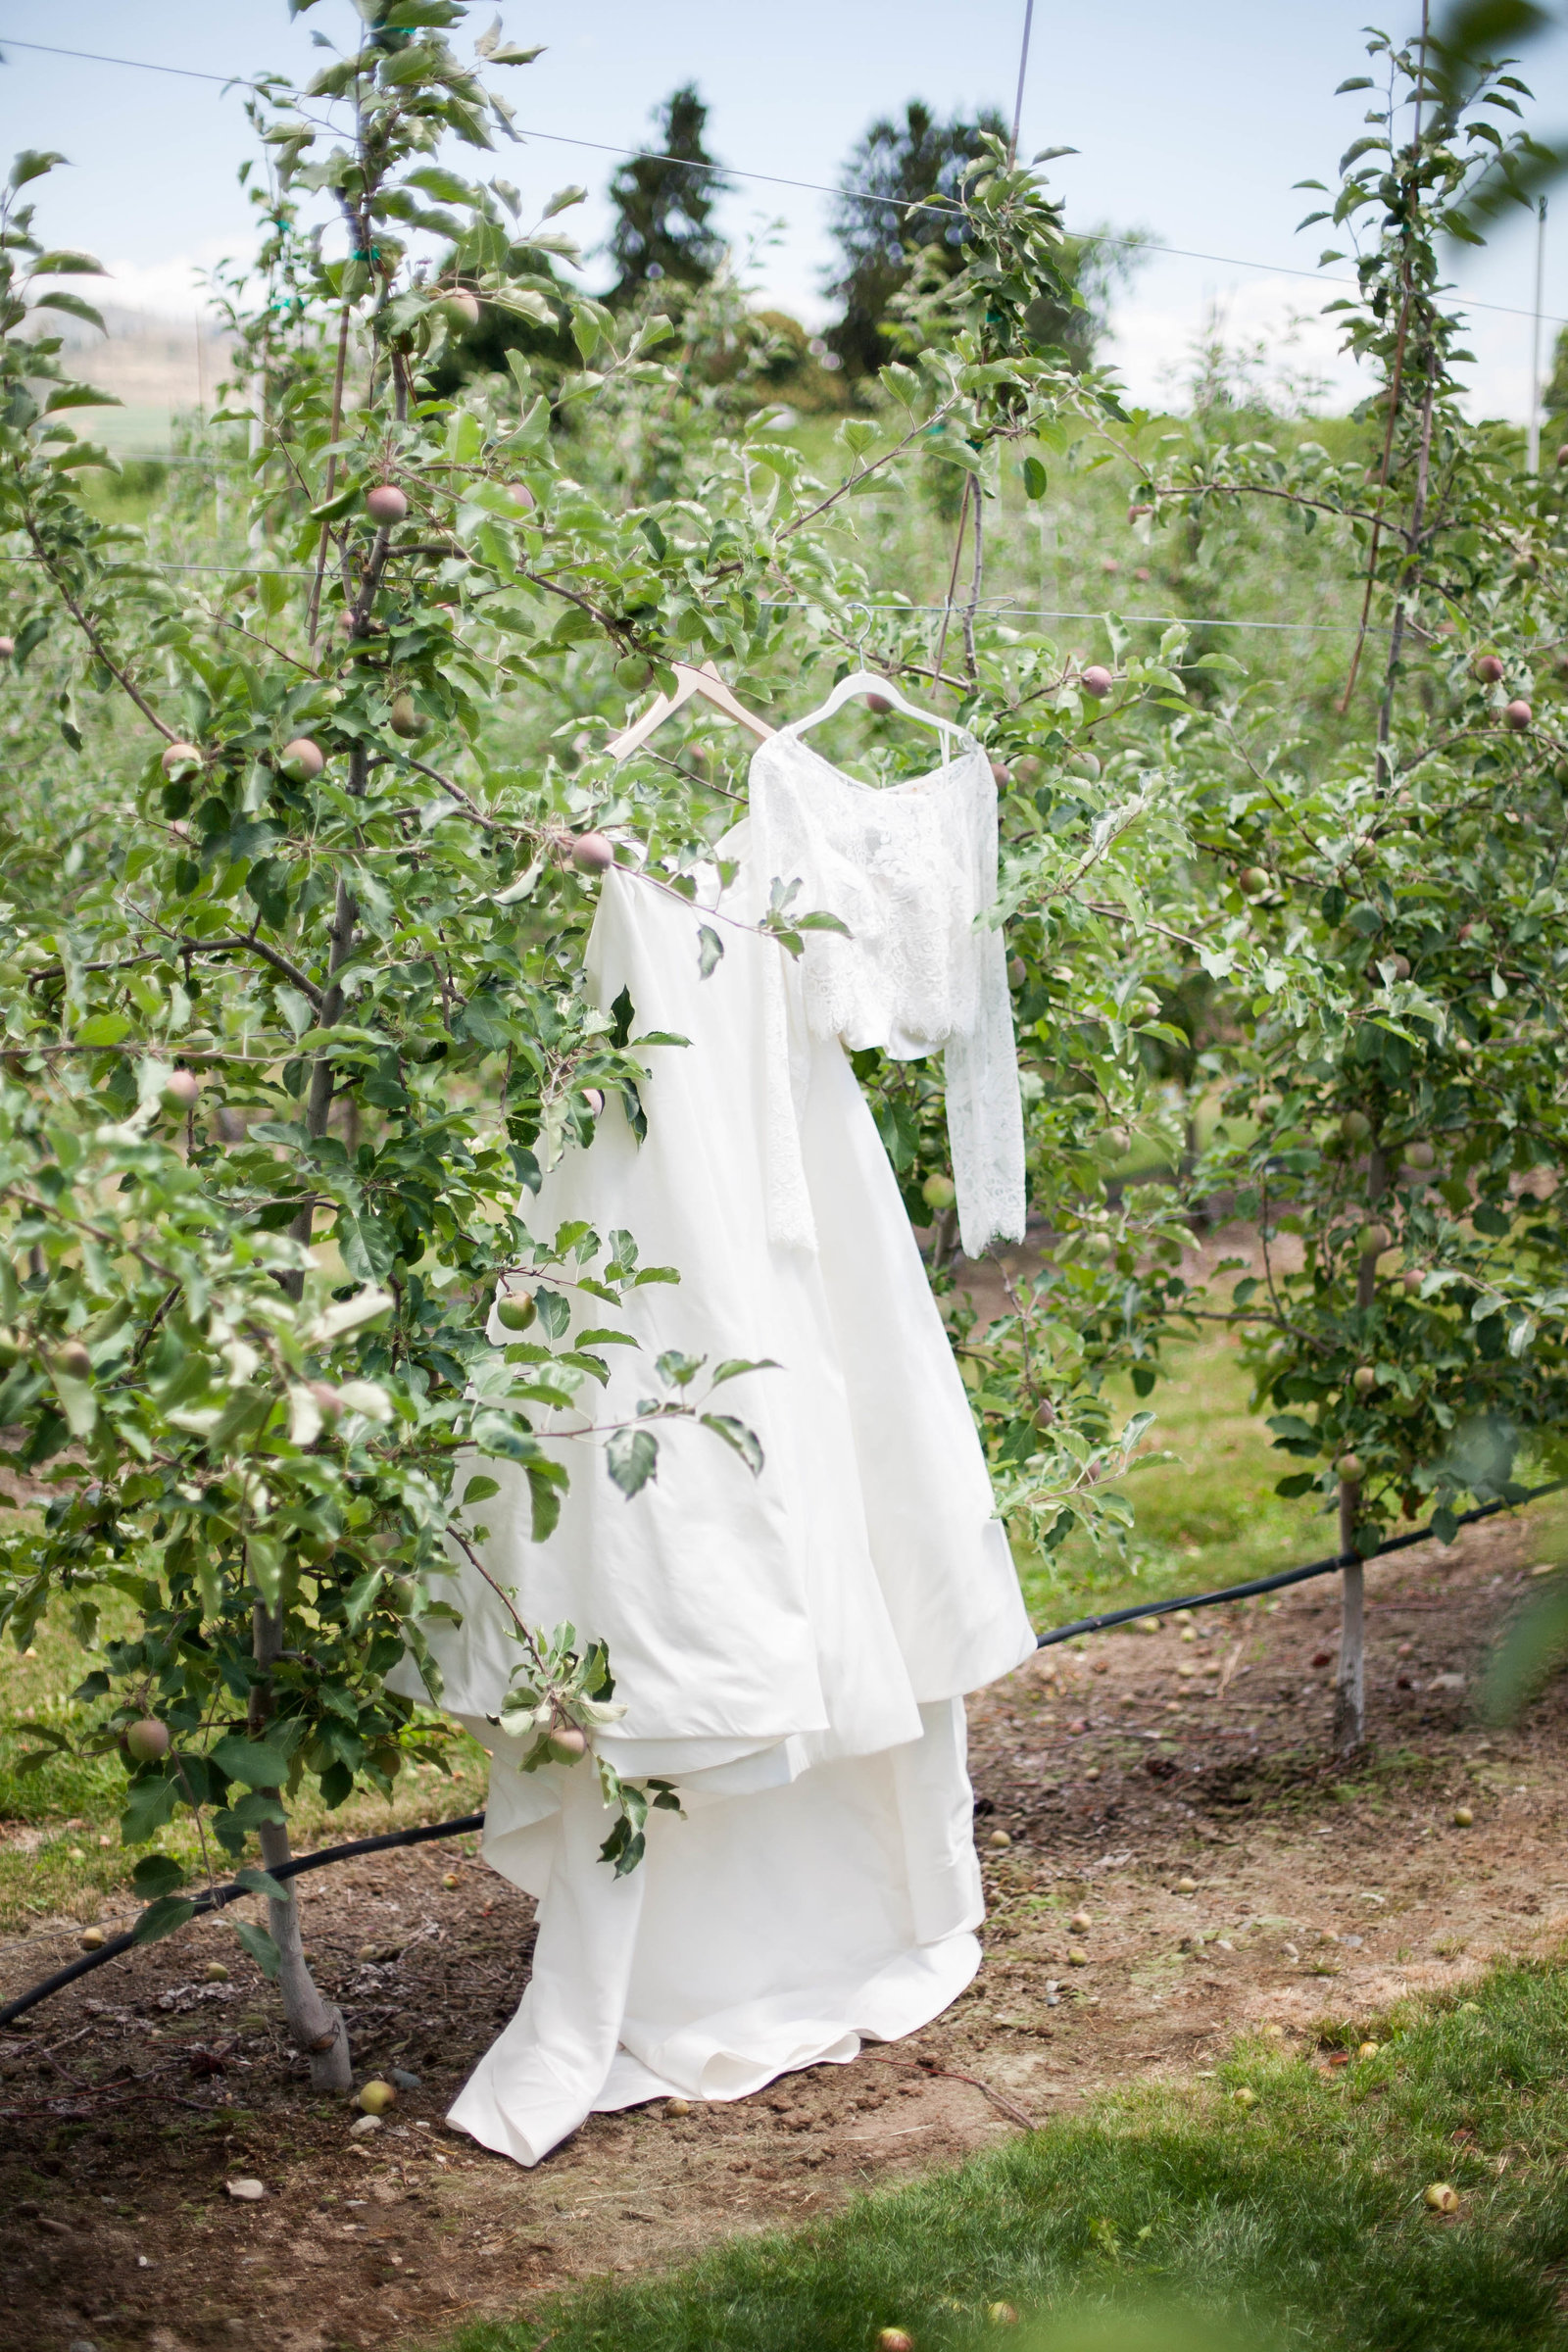 A wedding dress hanging in an orchard.